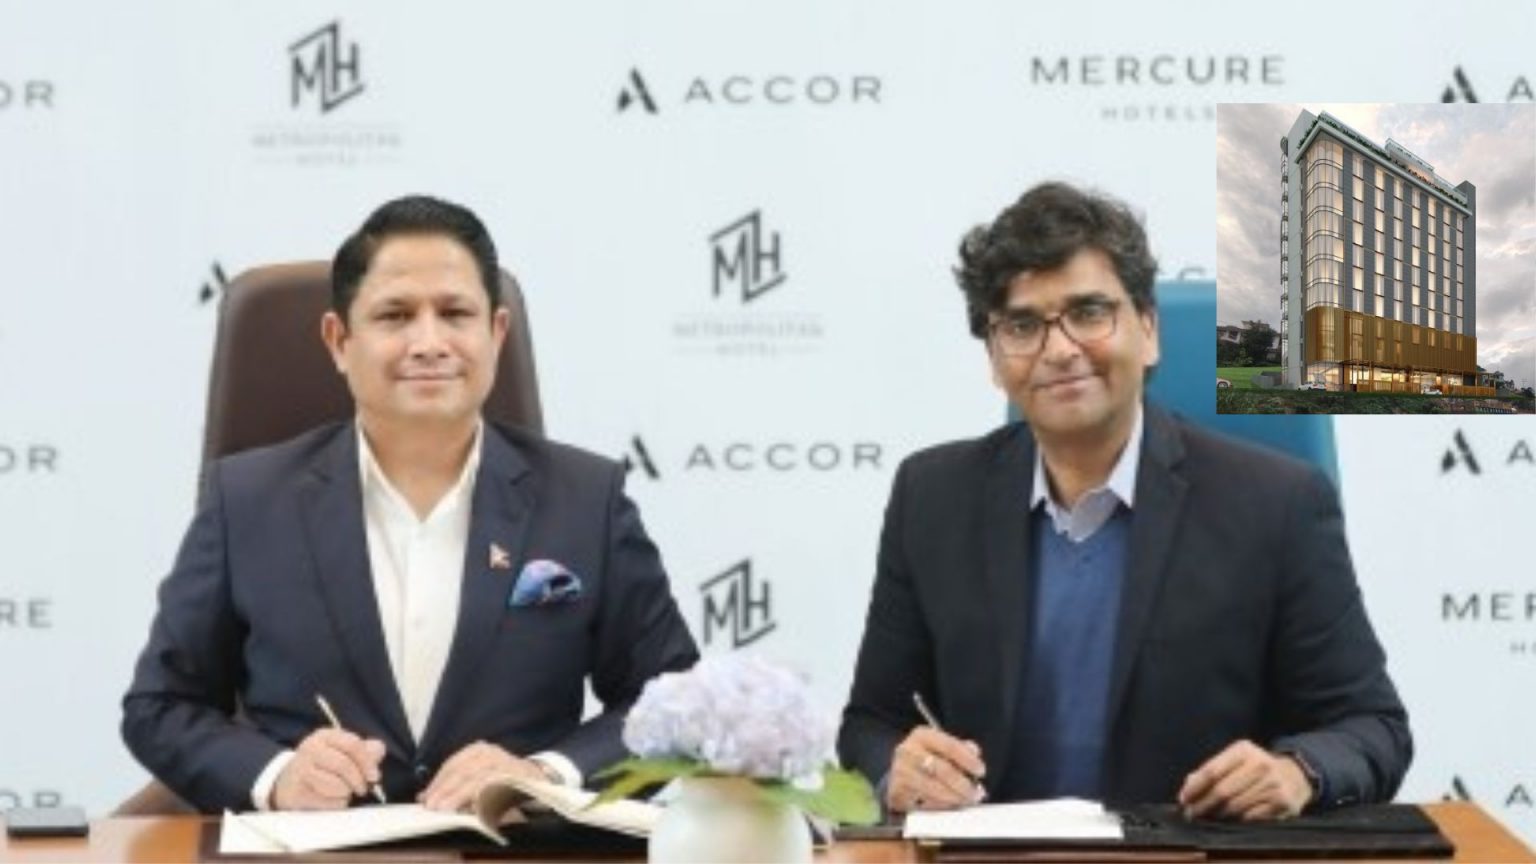 Accor group to invest to build Mercure Kathmandu Hotel in Nepal